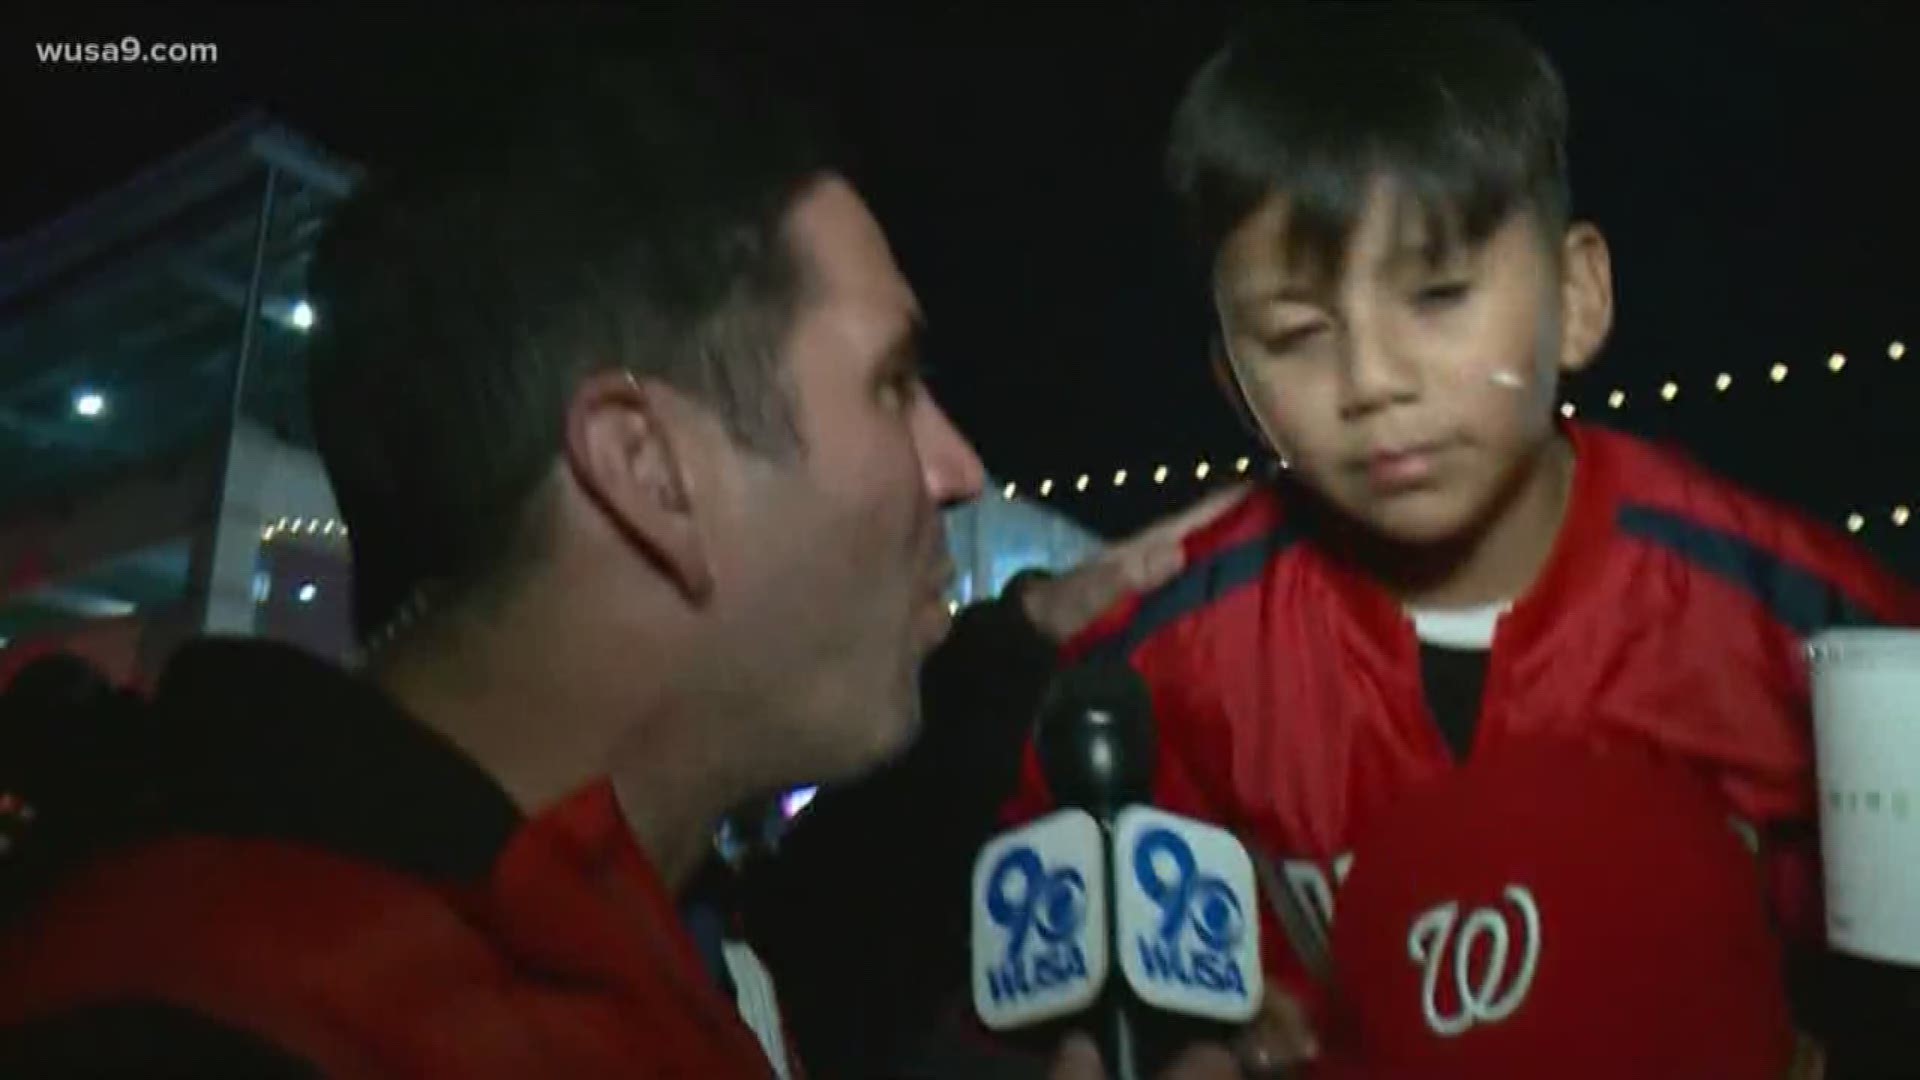 This 9-year-old had quite the first baseball game, celebrating with fans after the Nationals clinched their first World Series trip